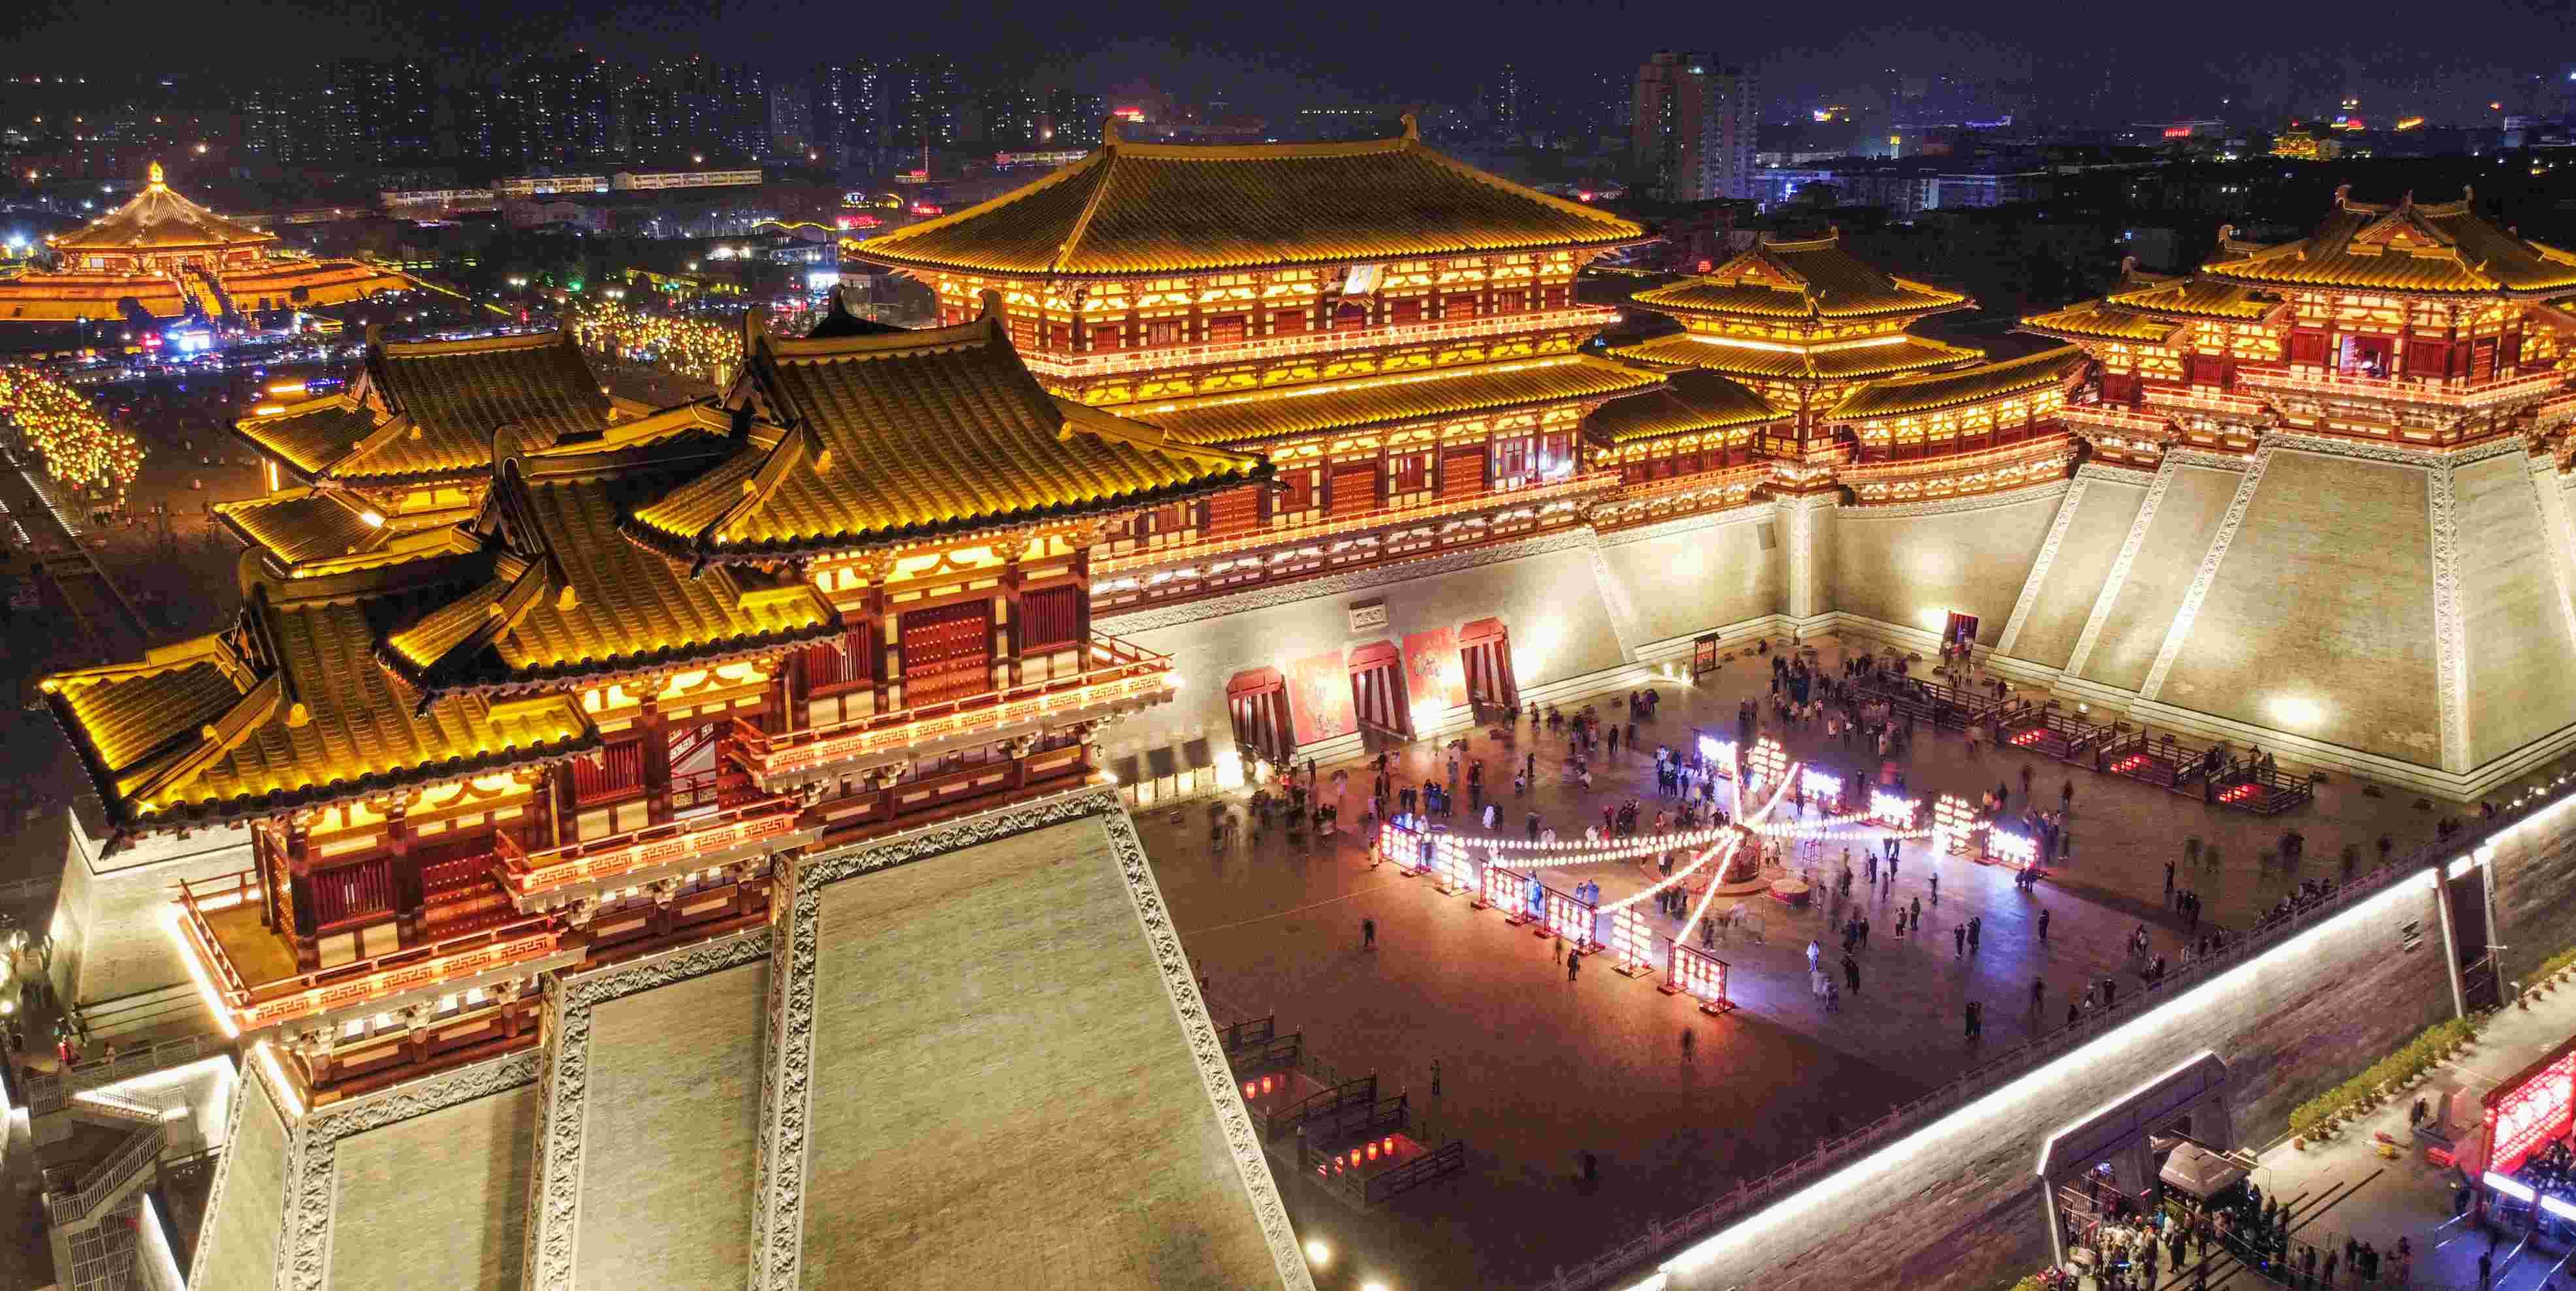 Decoding City Samples of Cultural Confidence | Luoyang is the Most Prosperous in Spring -- Decoding the Cultural Confidence of the Ancient Capital of Luoyang City Sample Culture | Industry | Ancient Capital